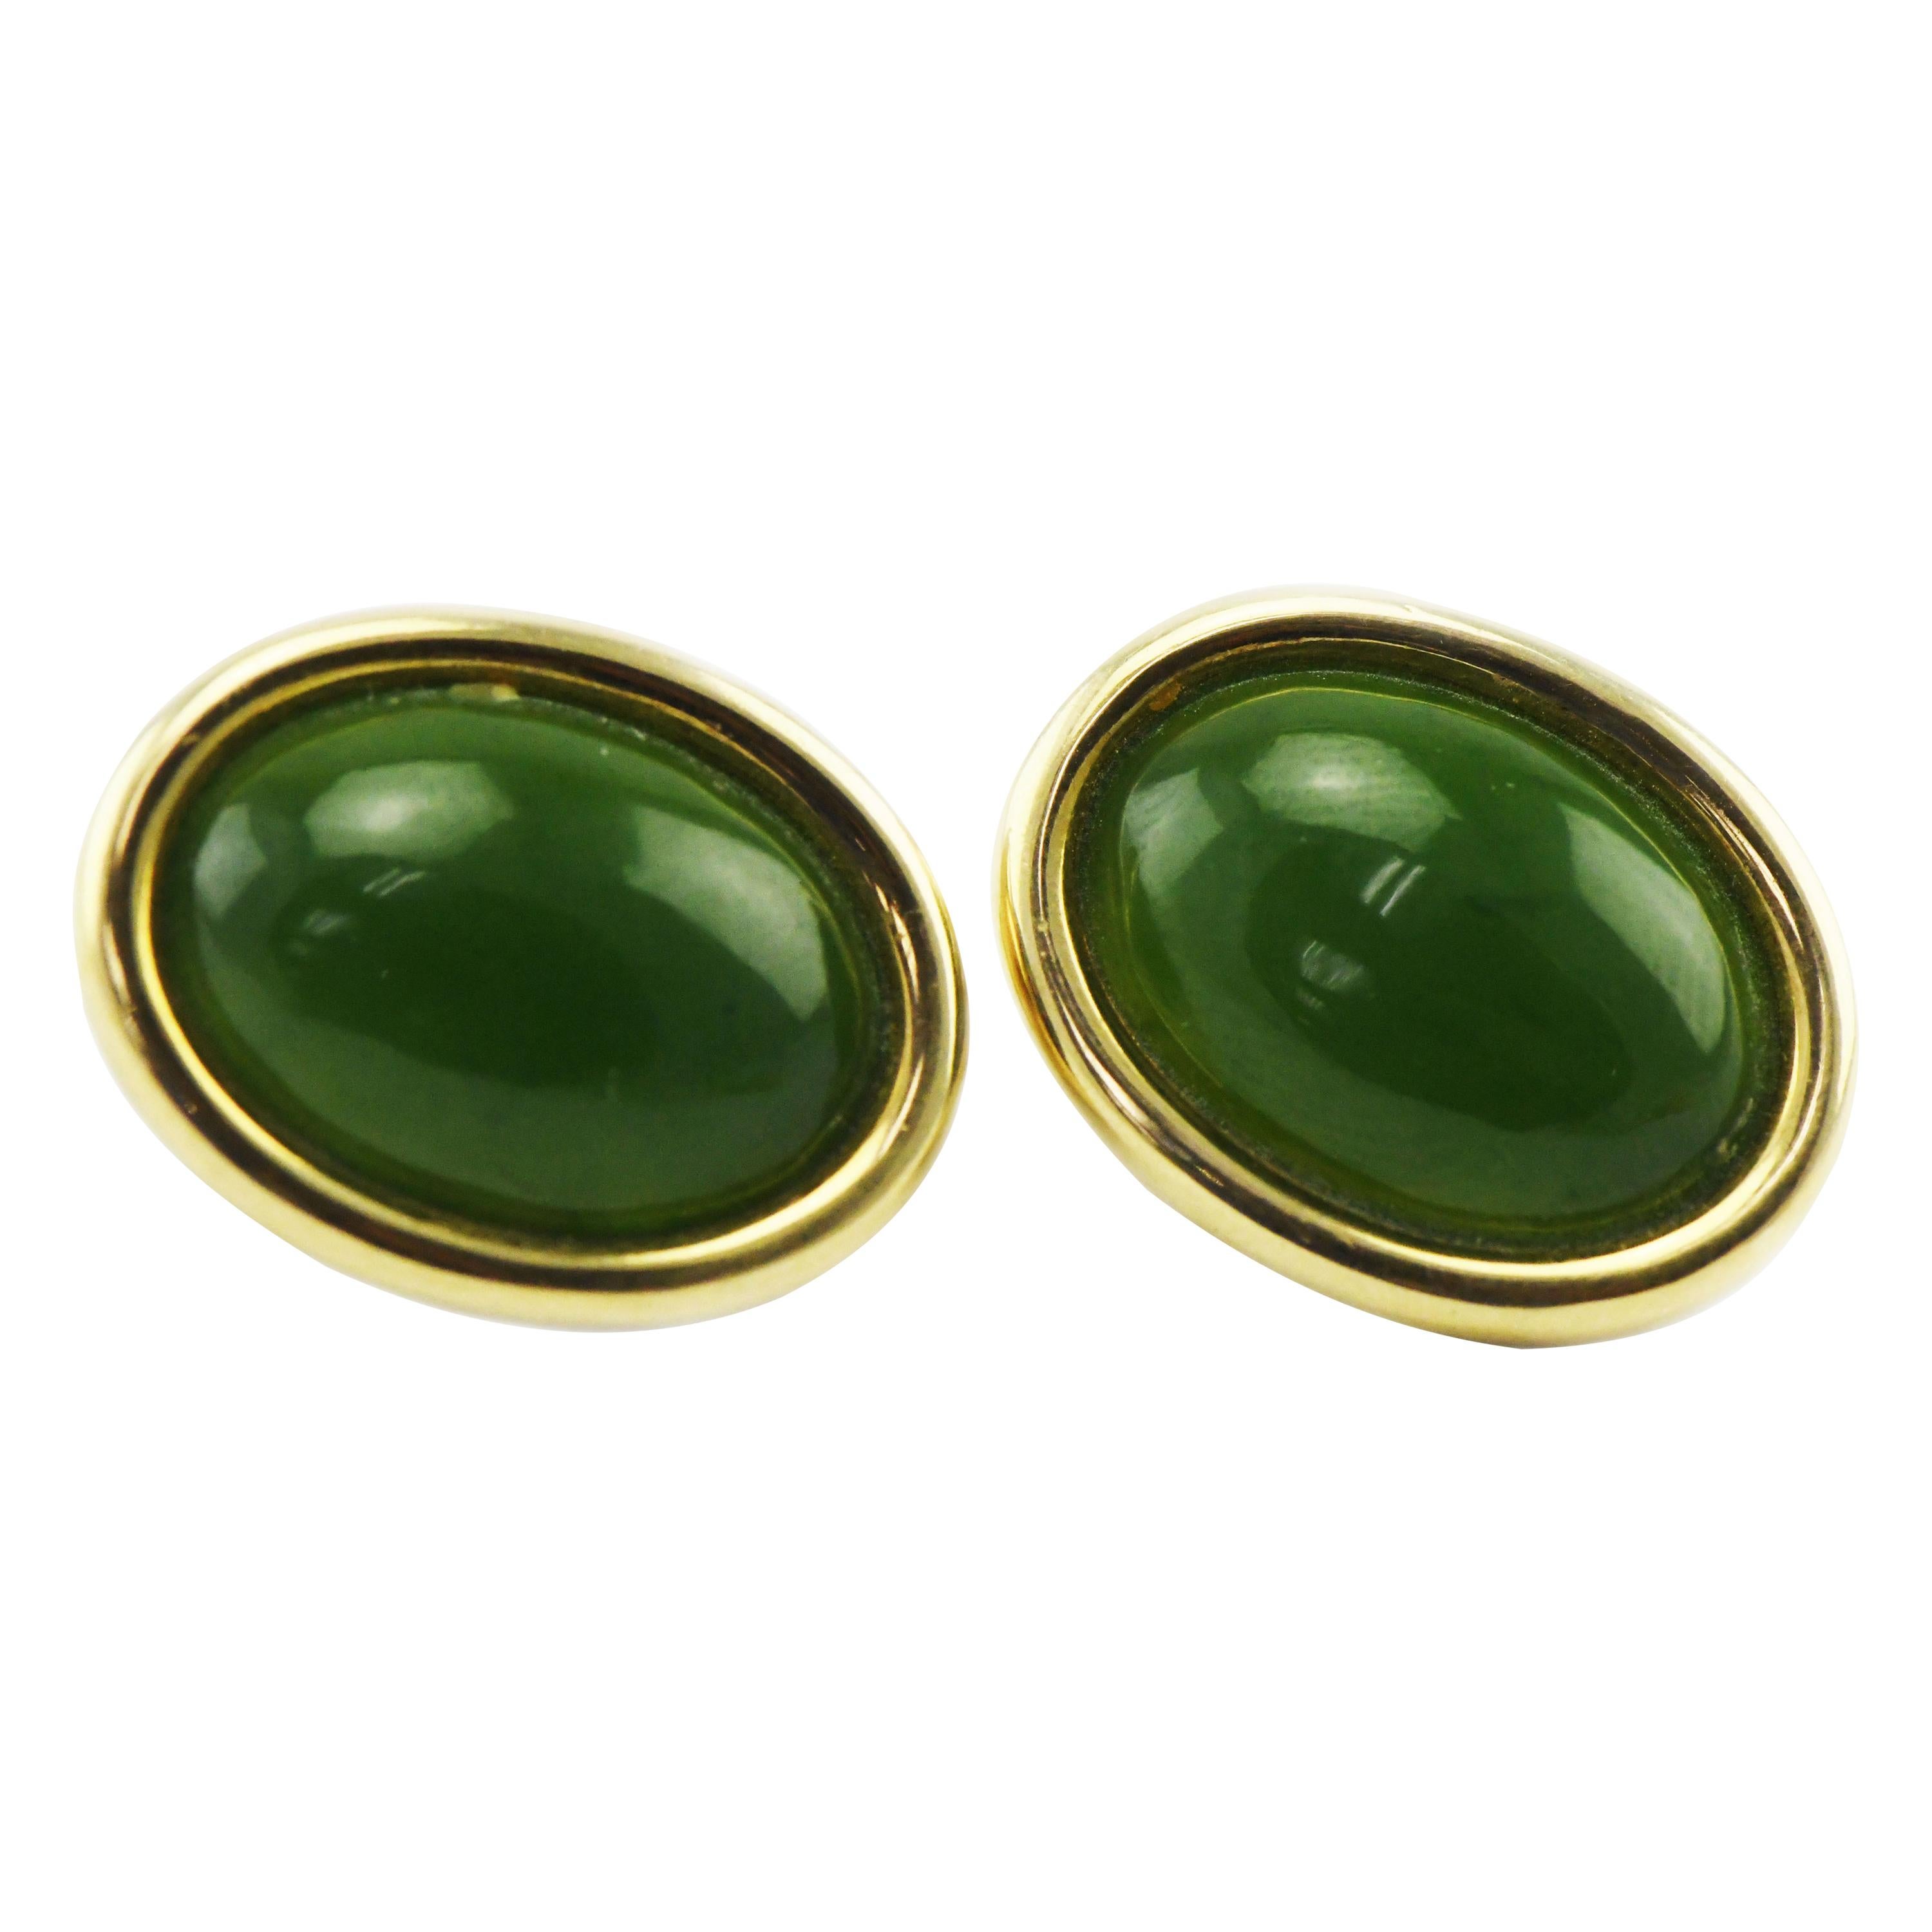 Tse Sui Luen 14 Karat Gold Earrings with Cabochon Carved Jade with Omega Backs For Sale